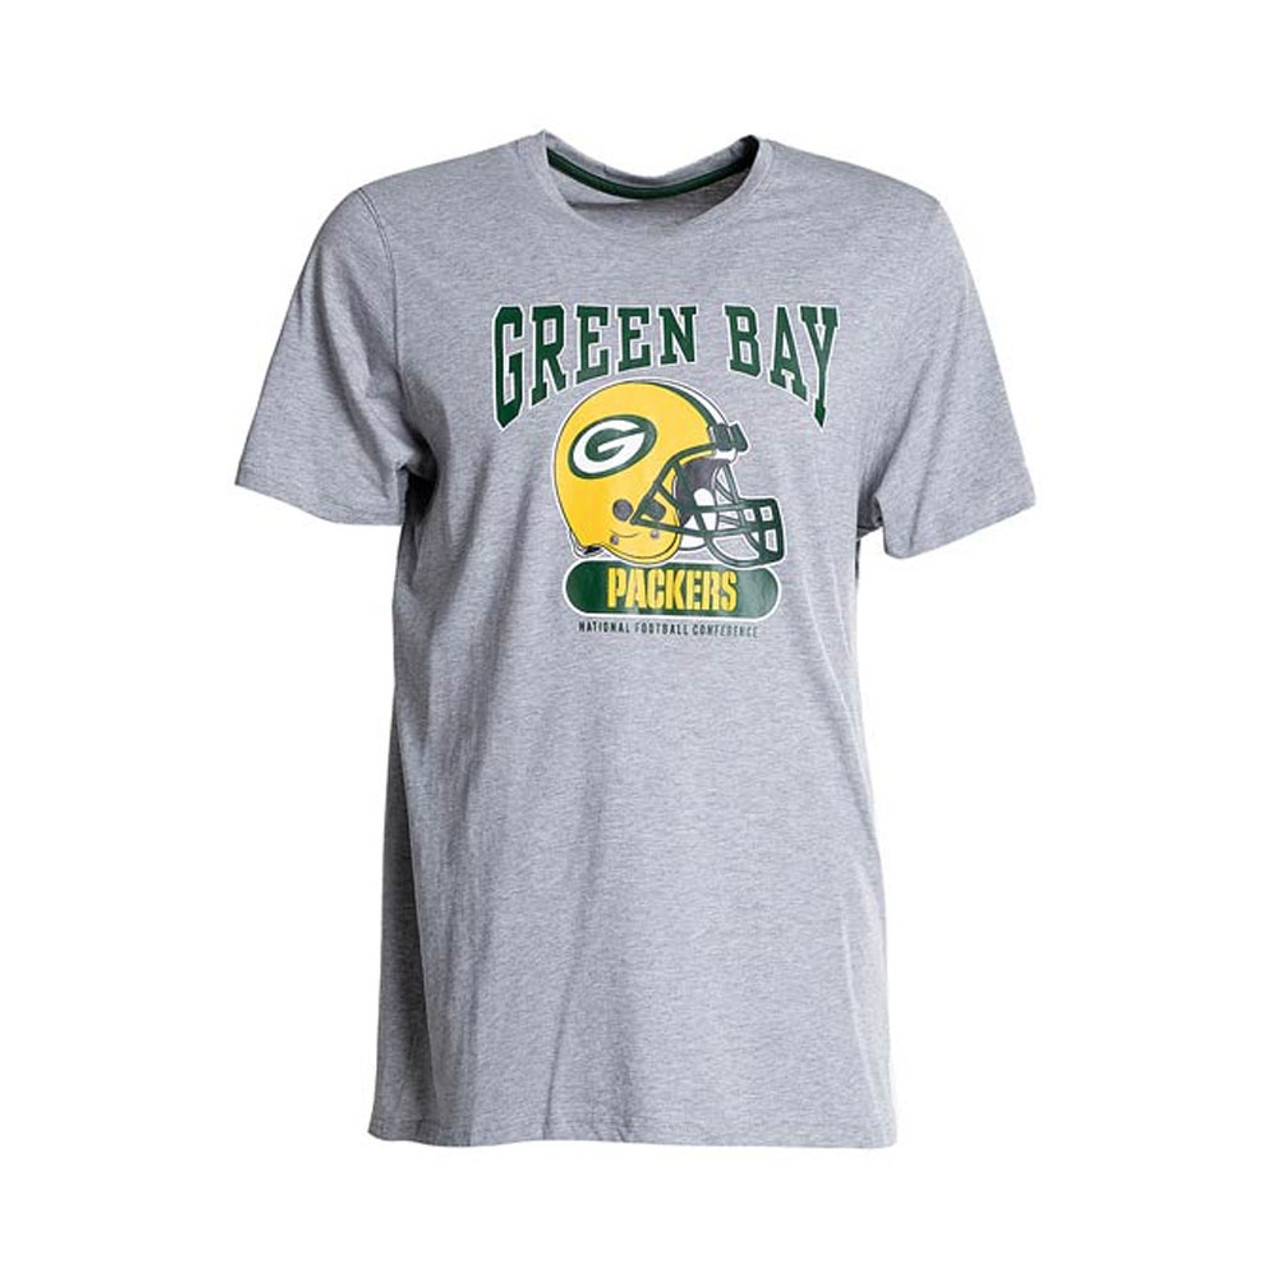 Green Bay Packers Archie t-shirt [grey 